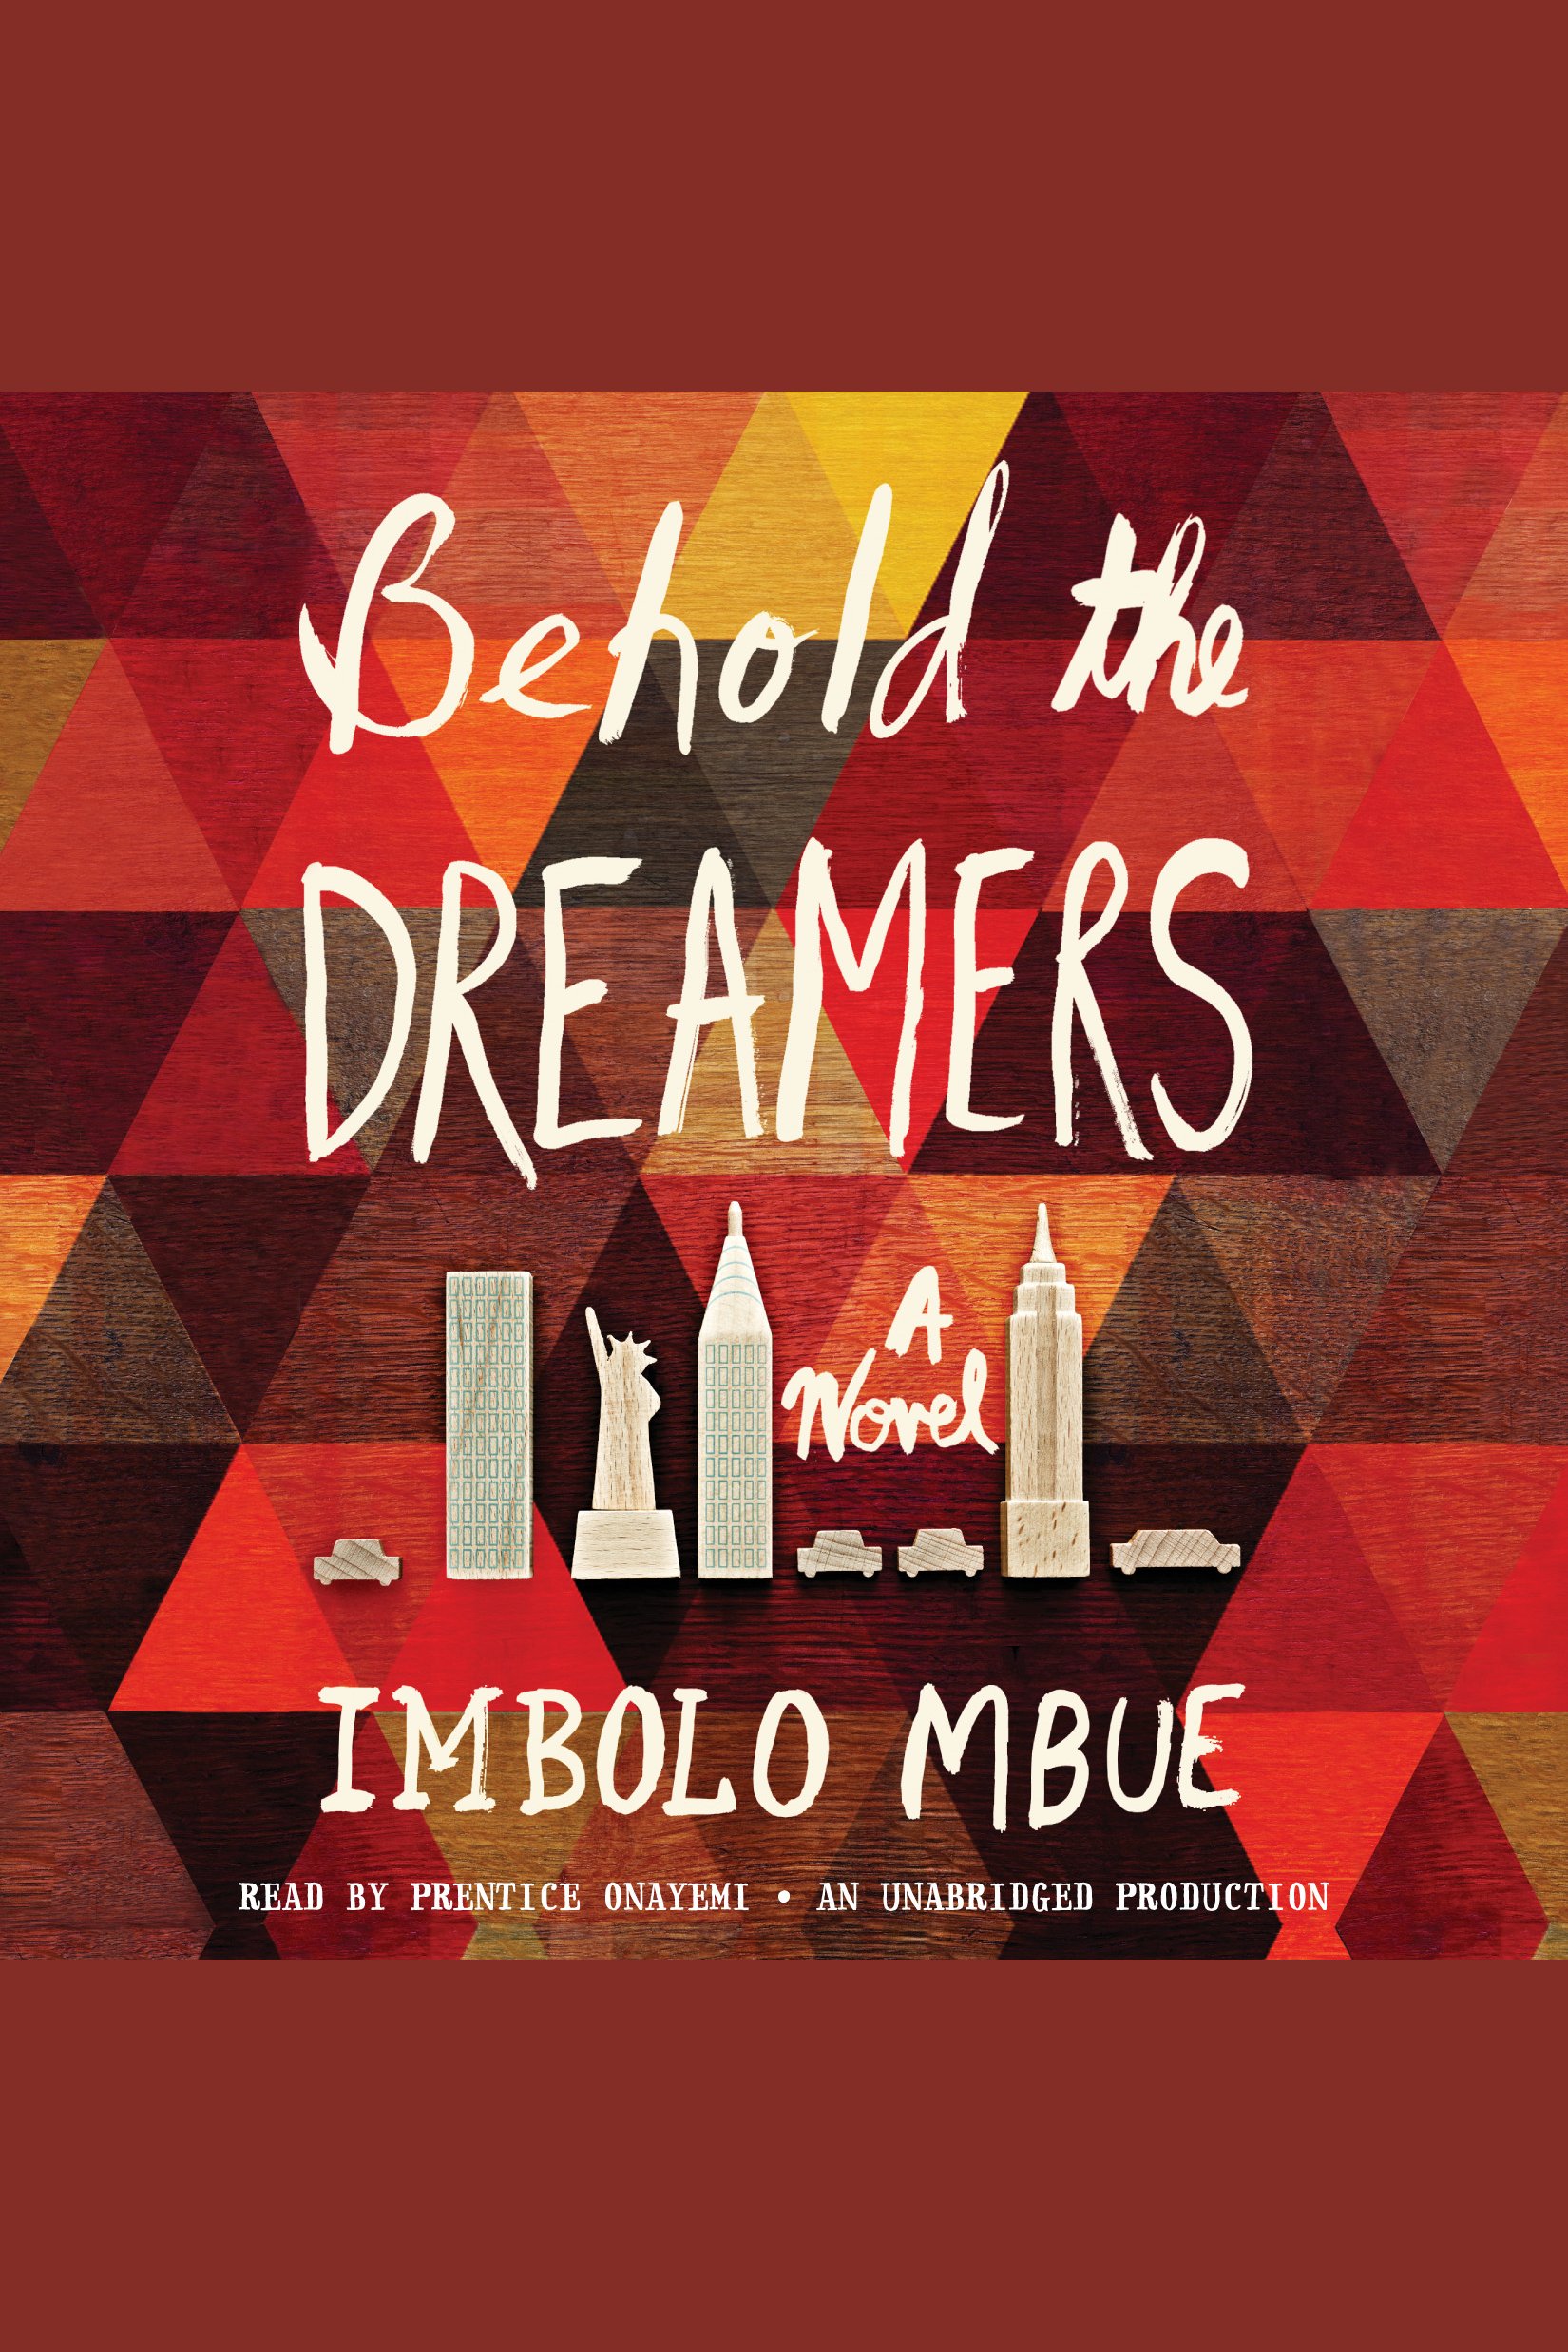 Behold the dreamers cover image